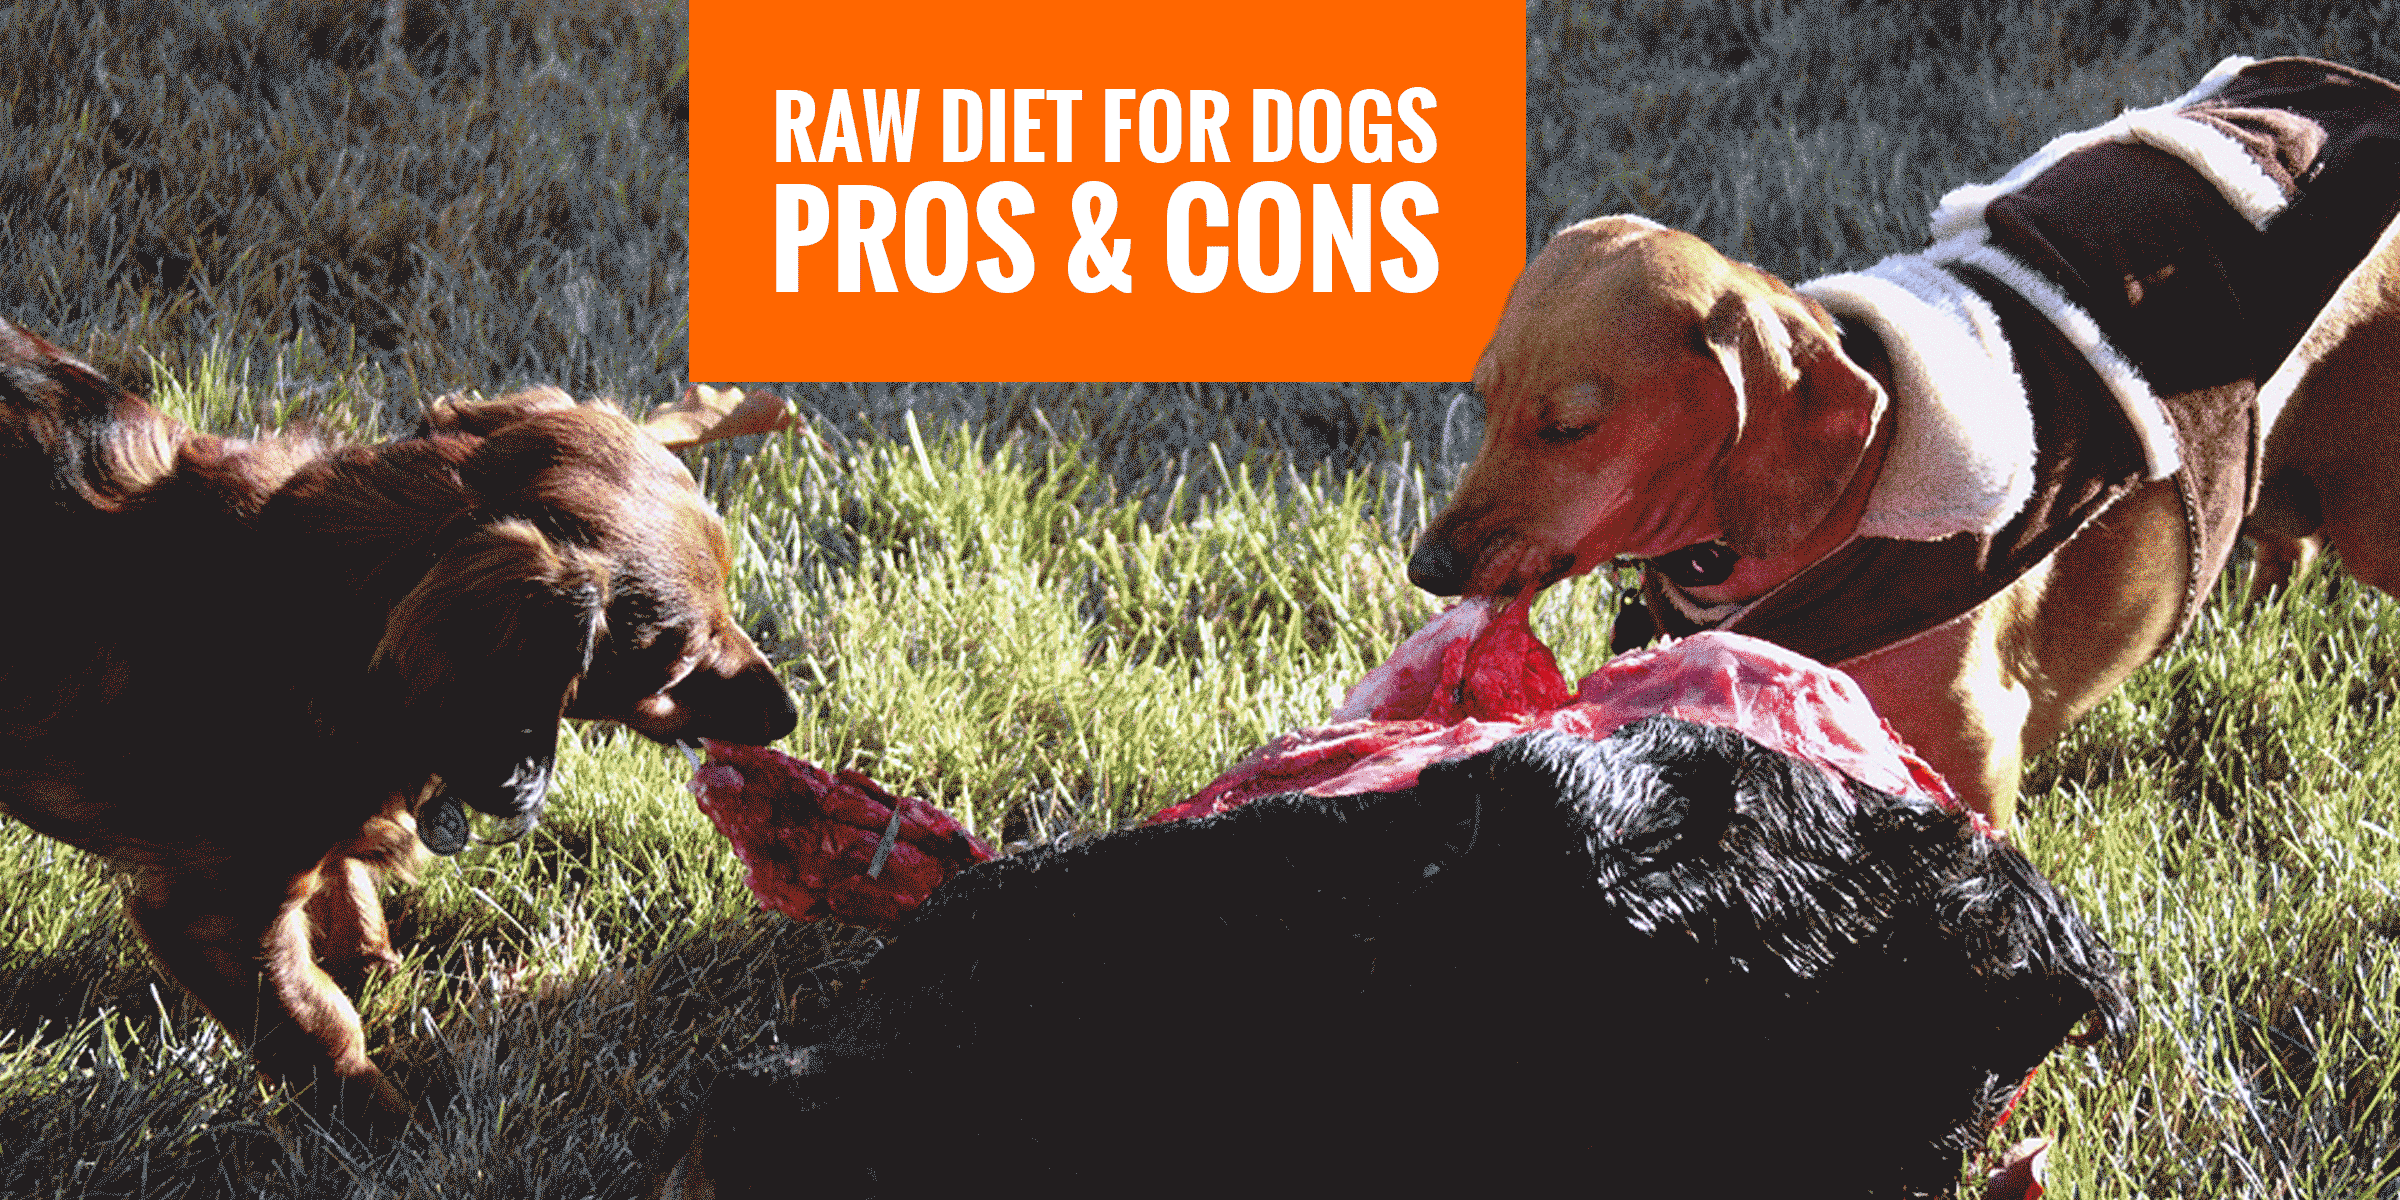 benefits and disadvantages of a raw diet for dogs